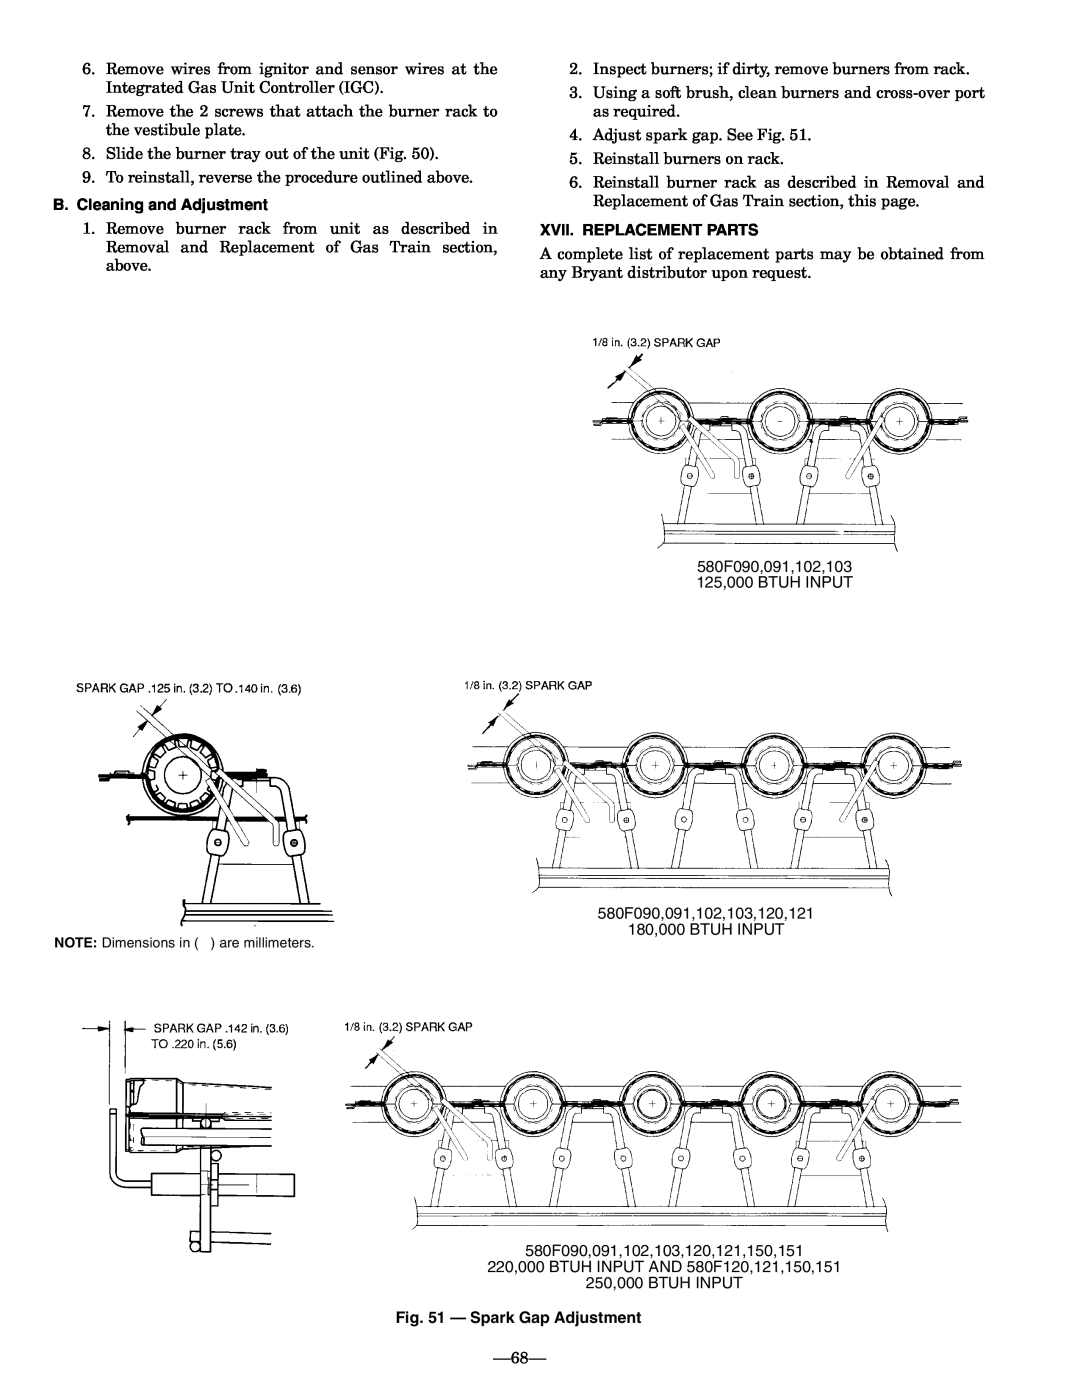 Bryant 580F installation instructions 68, B.Cleaning and Adjustment, Xvii. Replacement Parts, Spark Gap Adjustment 